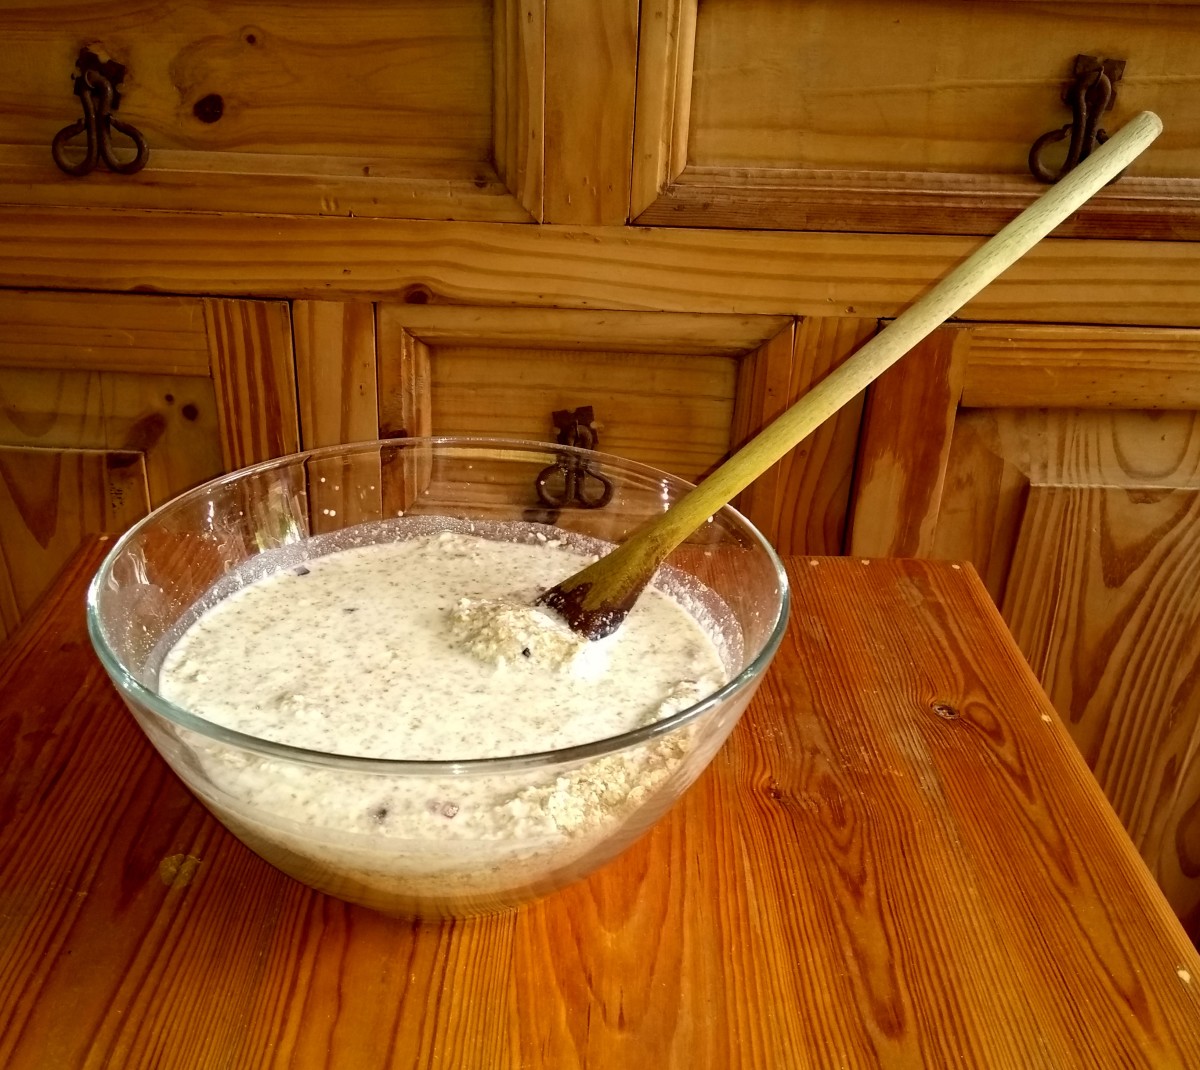 After dry mixing, add the curdled milk or buttermilk and stir thoroughly with a wooden spoon.